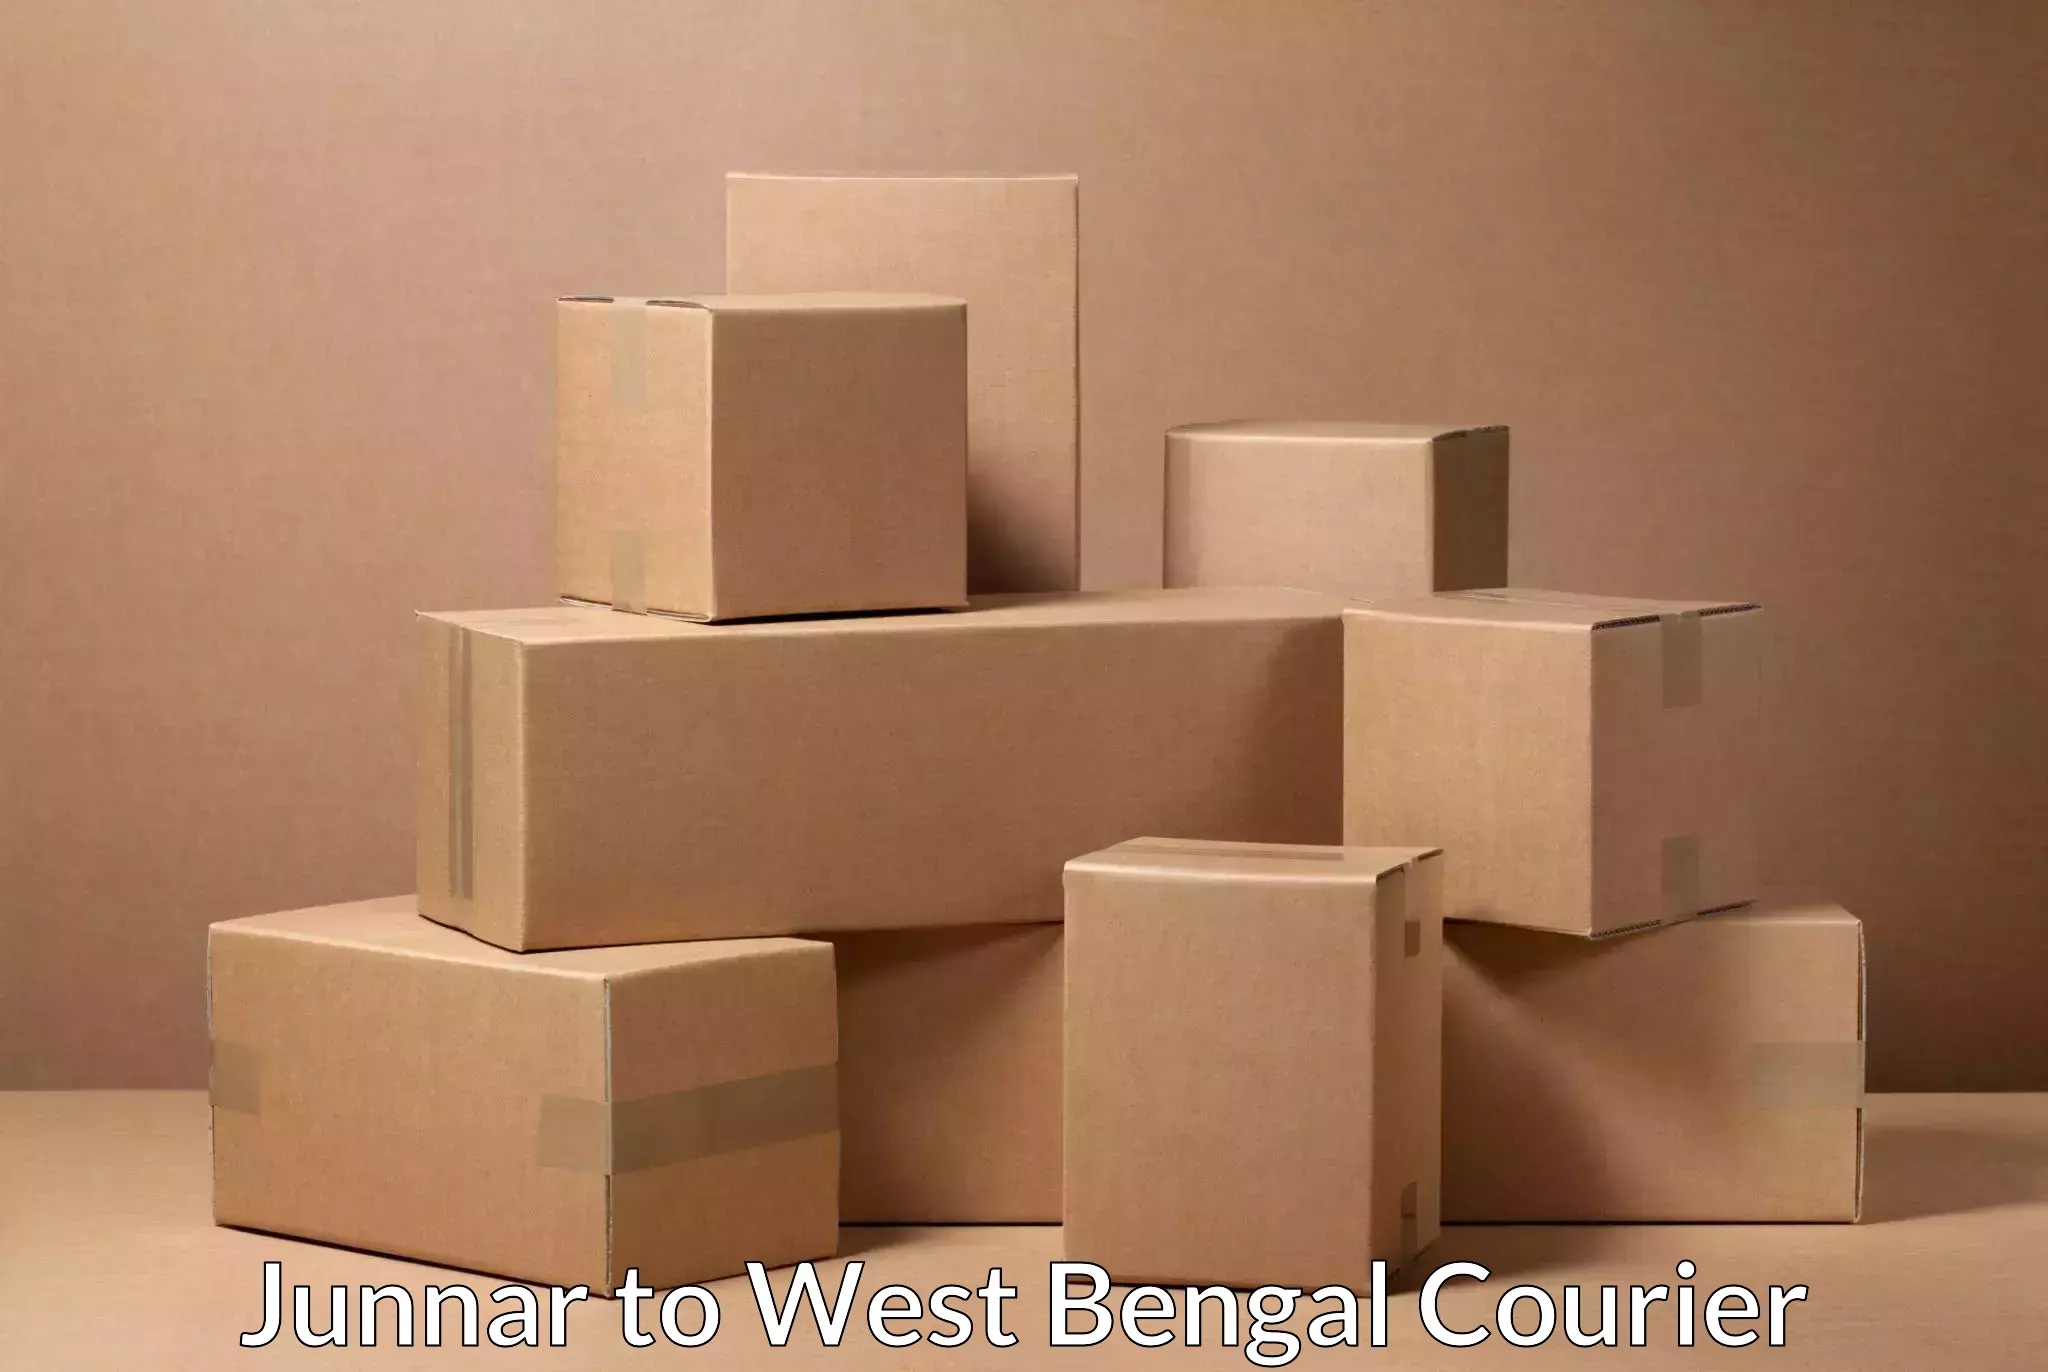 International courier networks Junnar to West Bengal